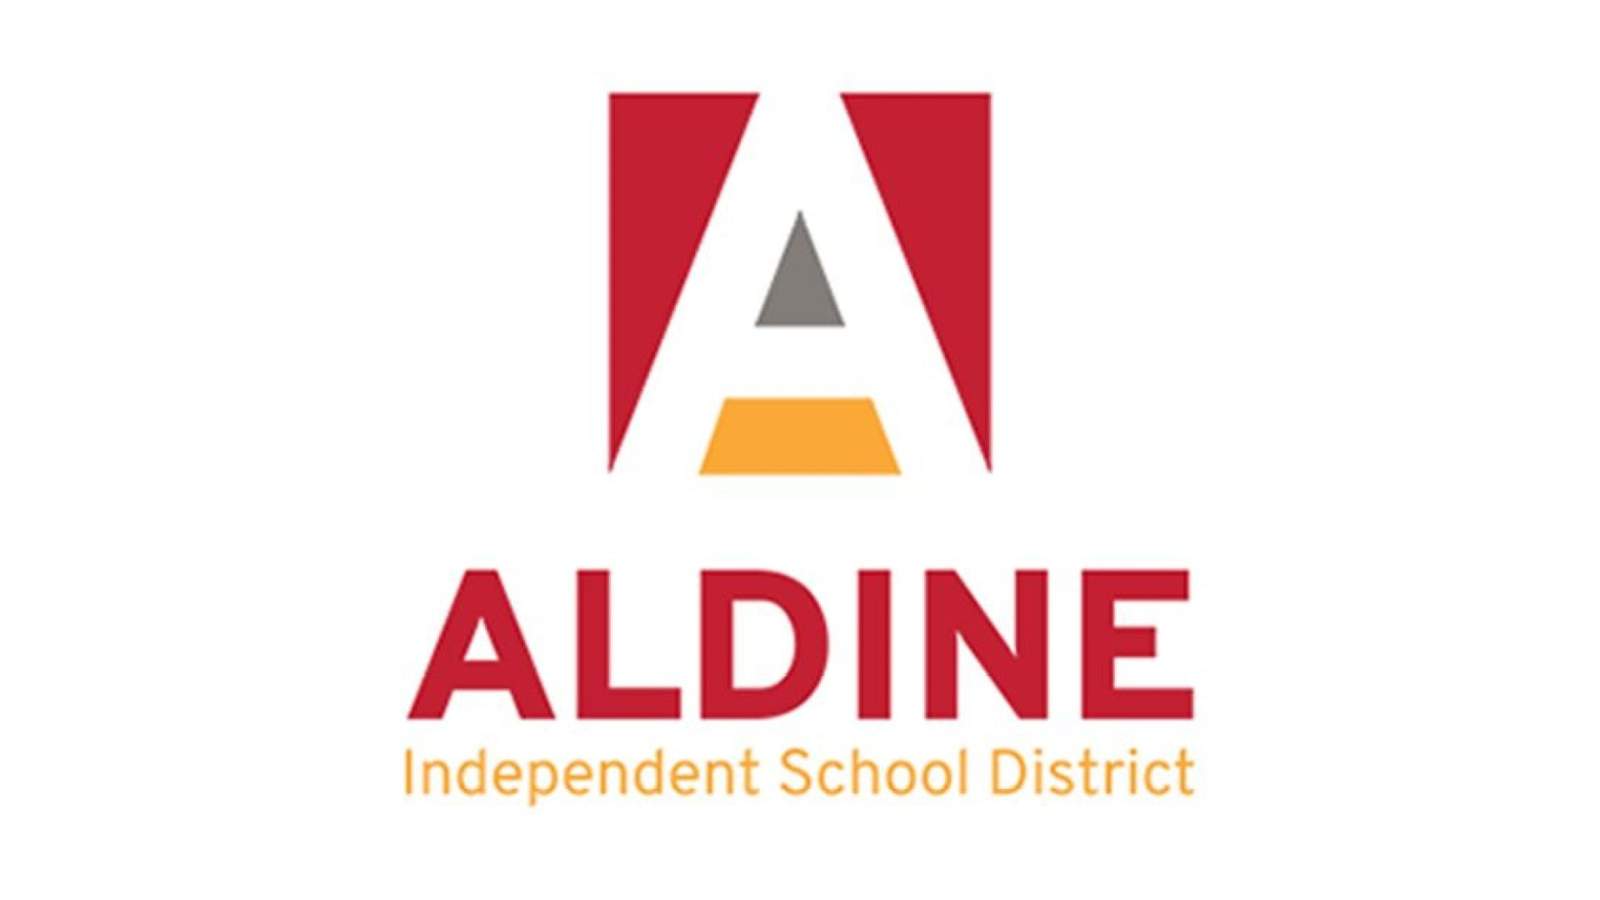 Aldine ISD: What you need to know about the district’s 2020-2021 school plans